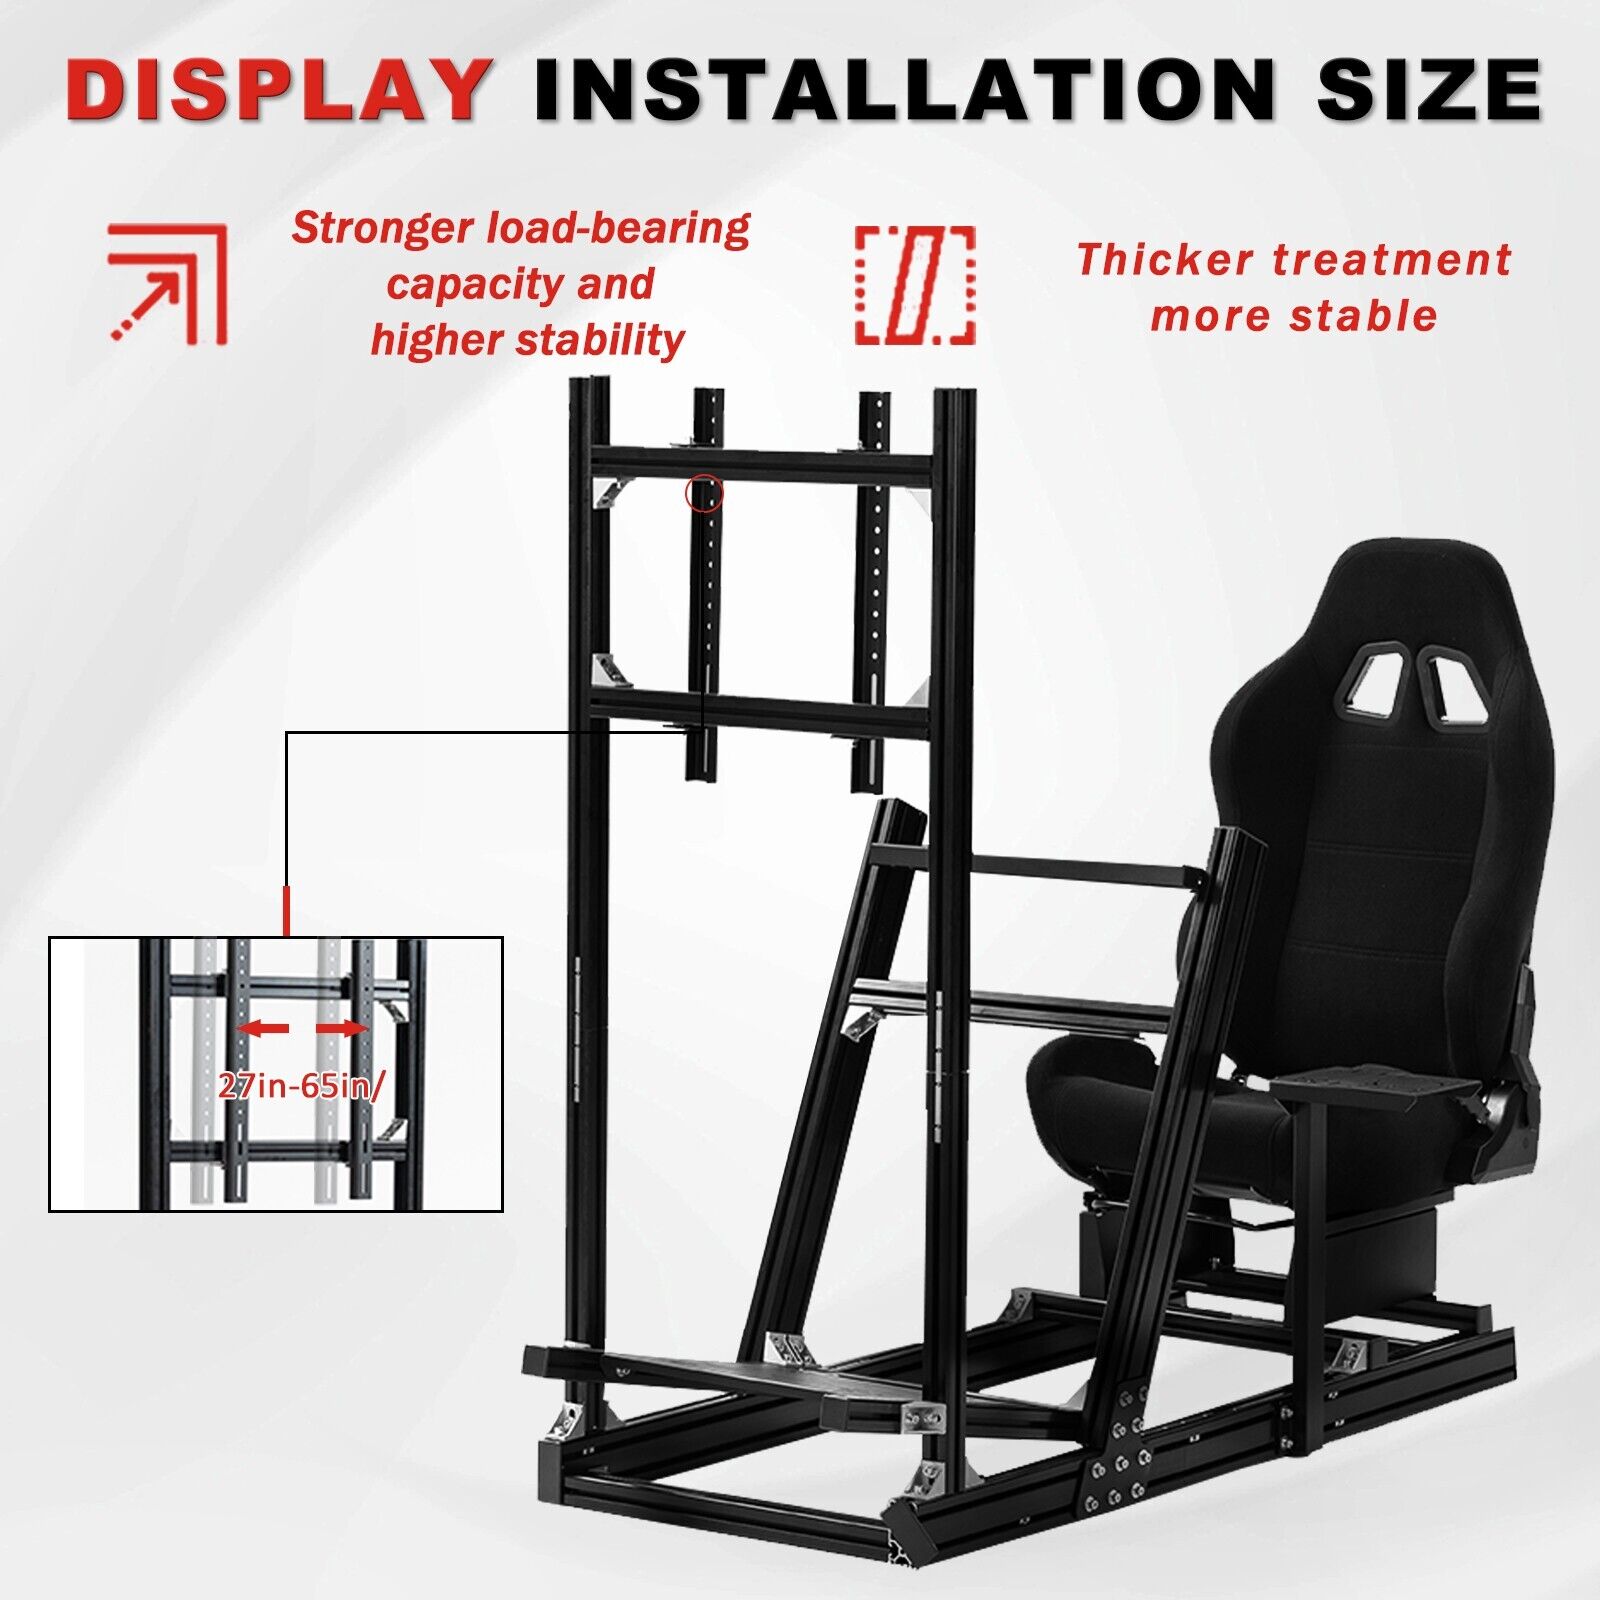 Minneer F1 Racing simulator Cockpit with Seat & Monitor Stand Fit Logitech G29 G920 G923